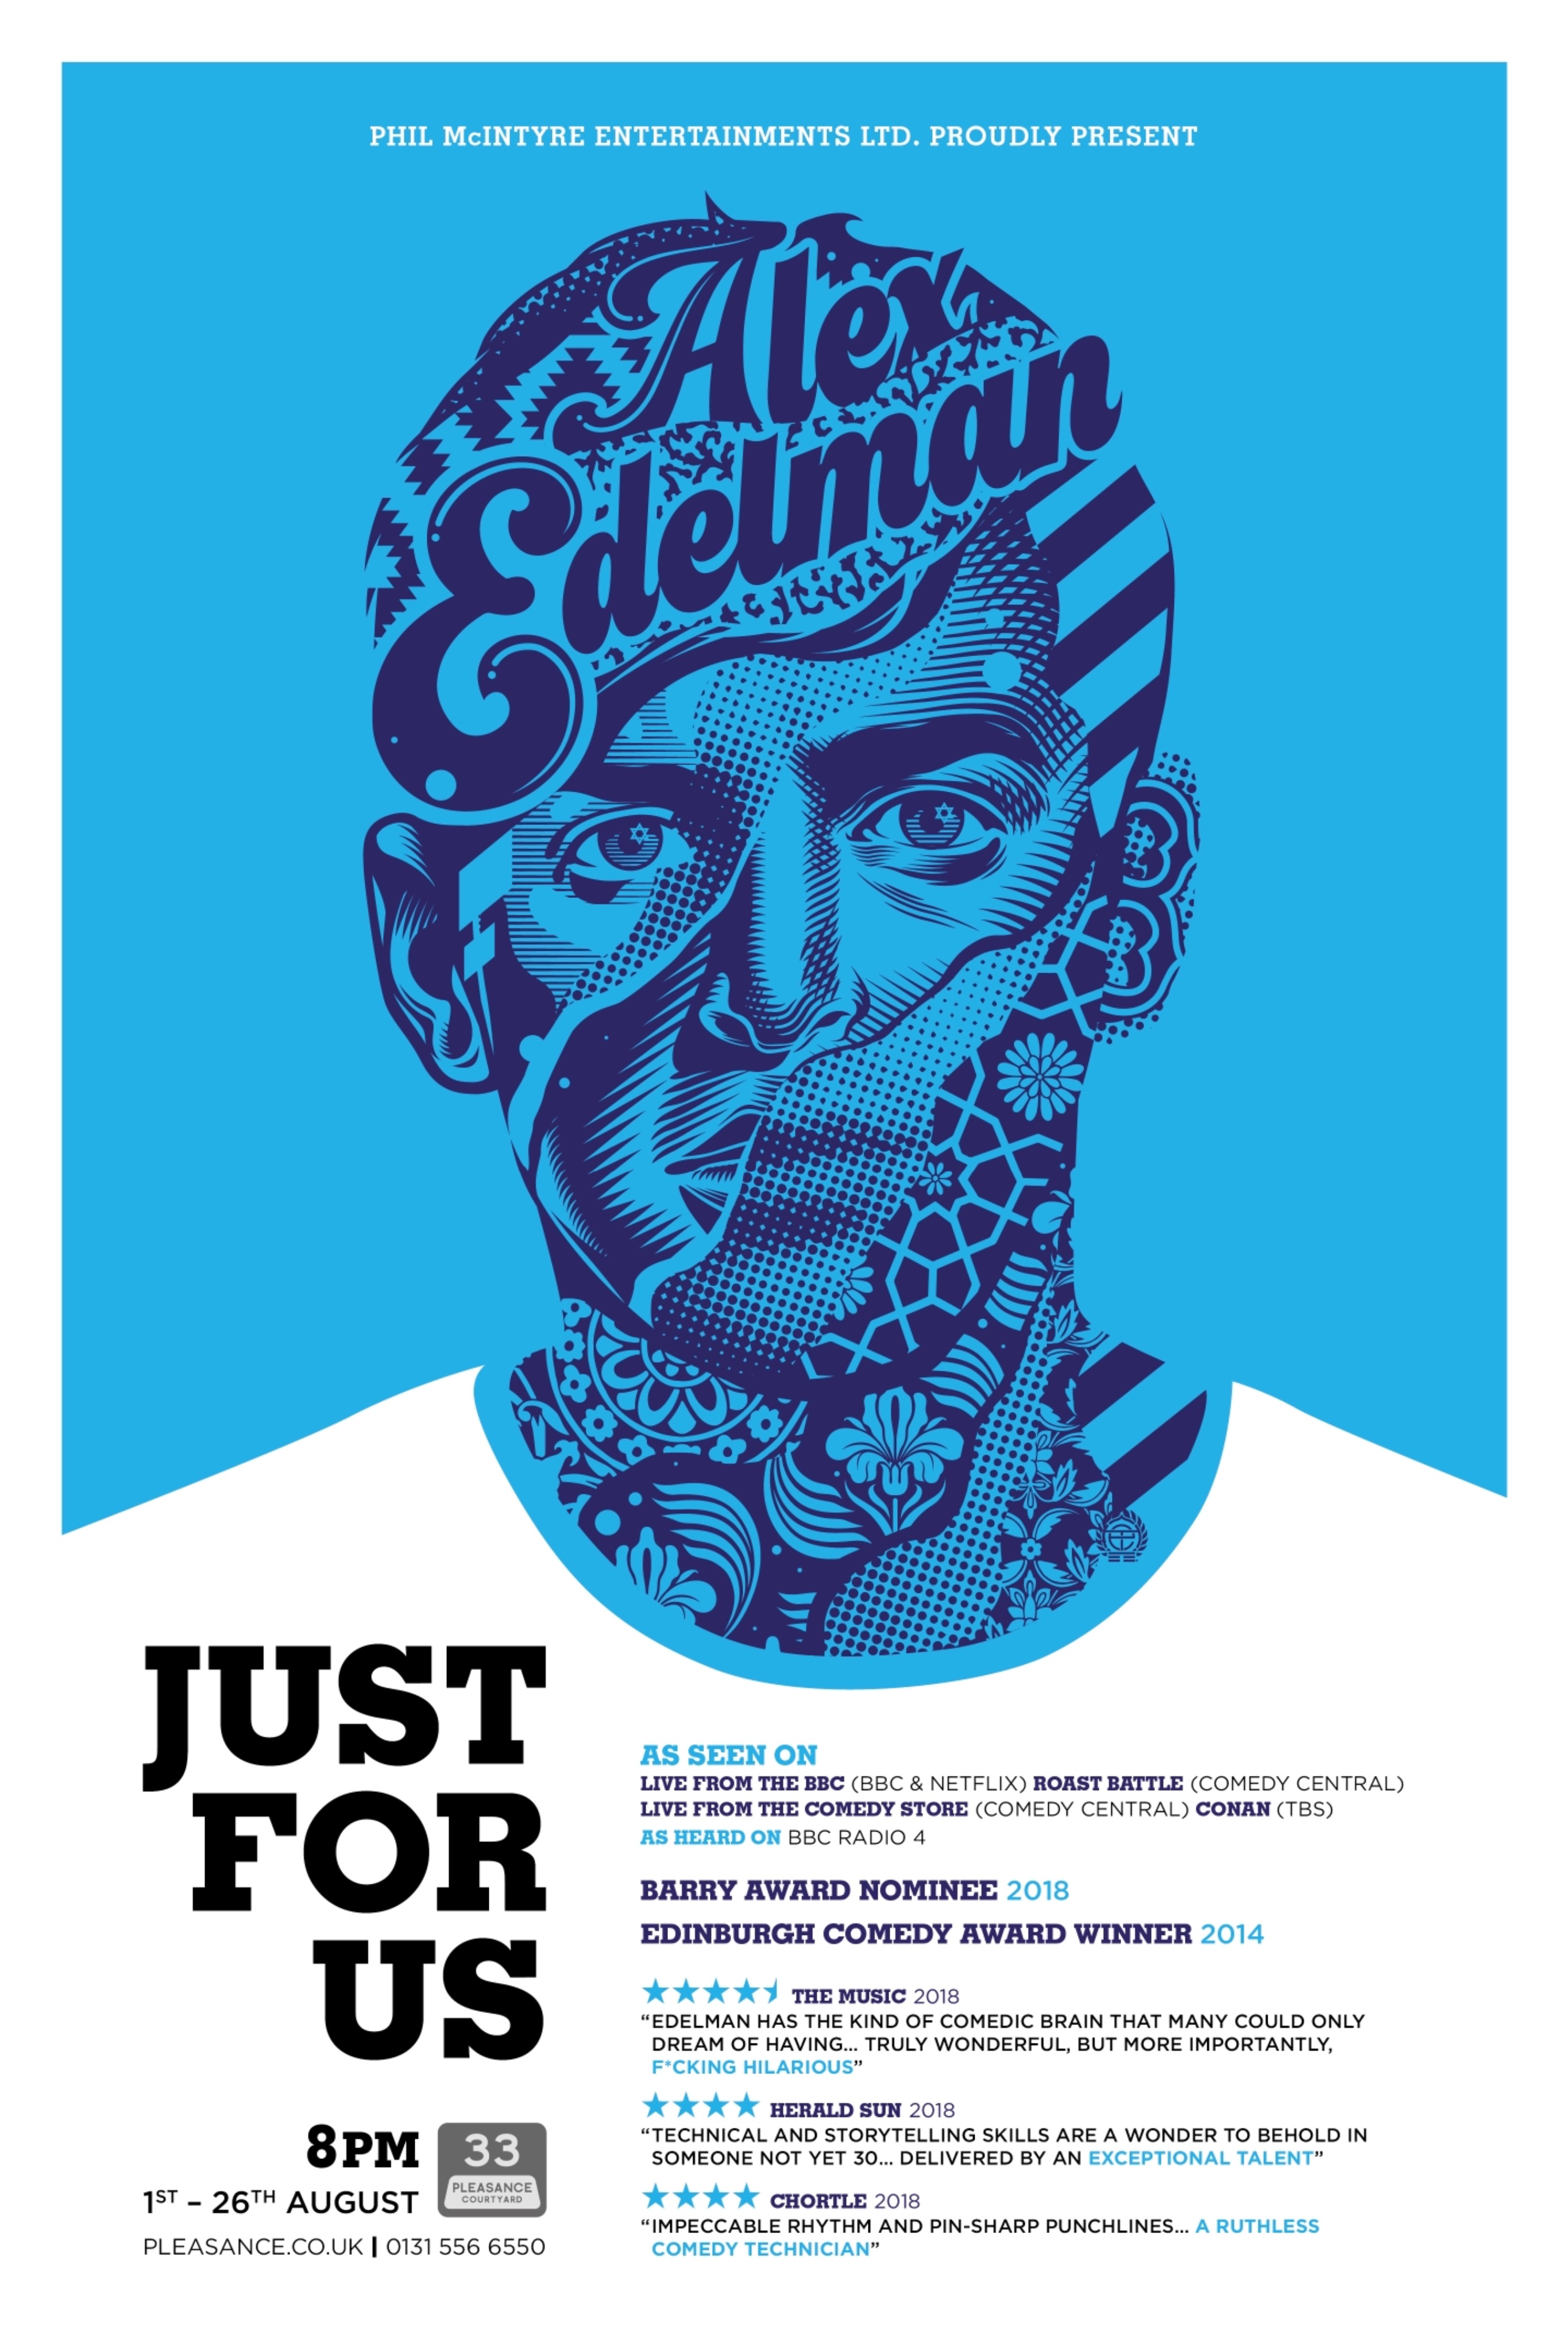 The poster for Alex Edelman: Just for Us